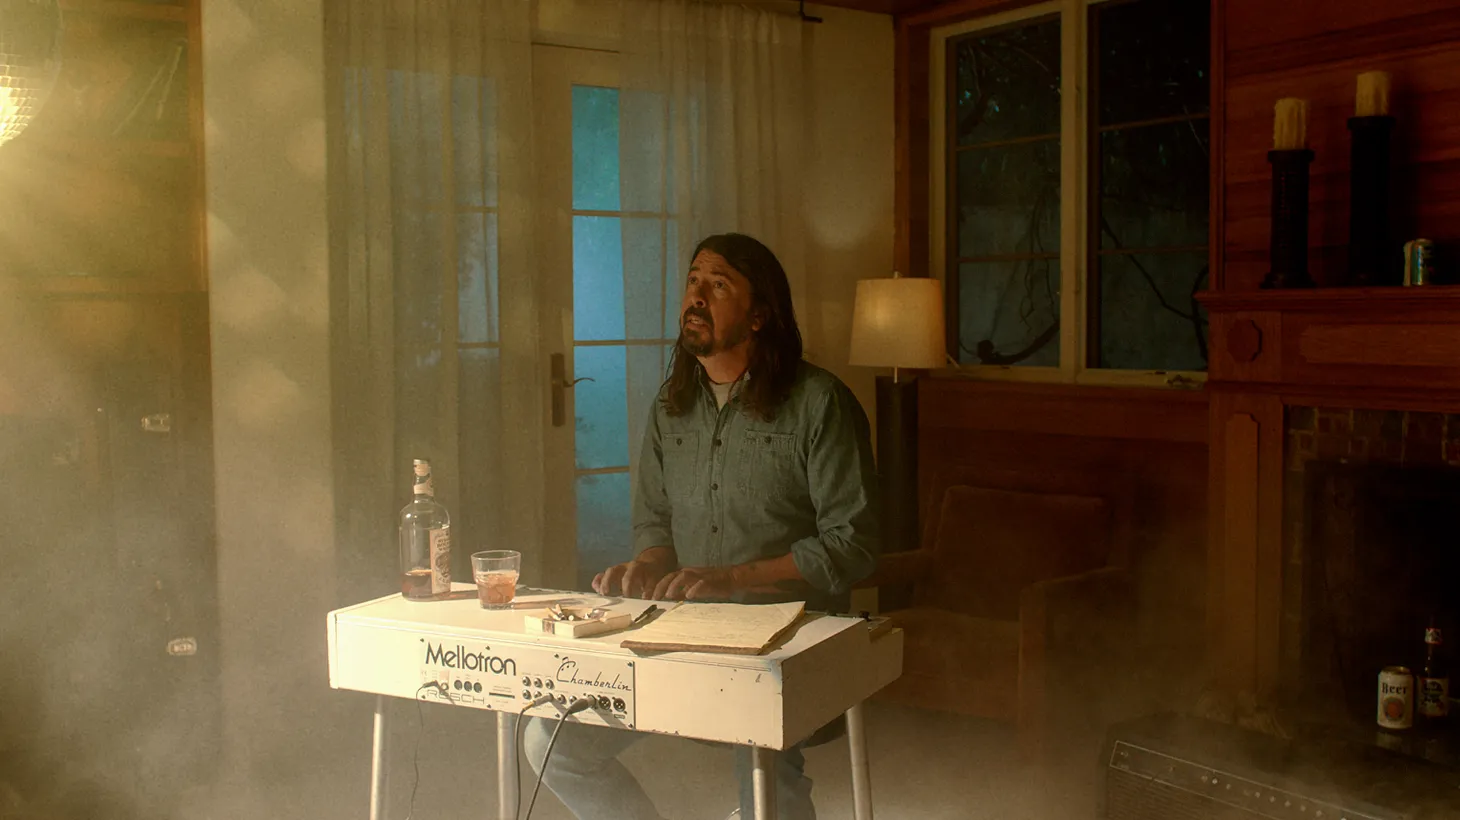 Rock and Roll Hall of Famer and Foo Fighters frontman Dave Grohl confronts supernatural forces alongside his bandmates in the film “Studio 666.”